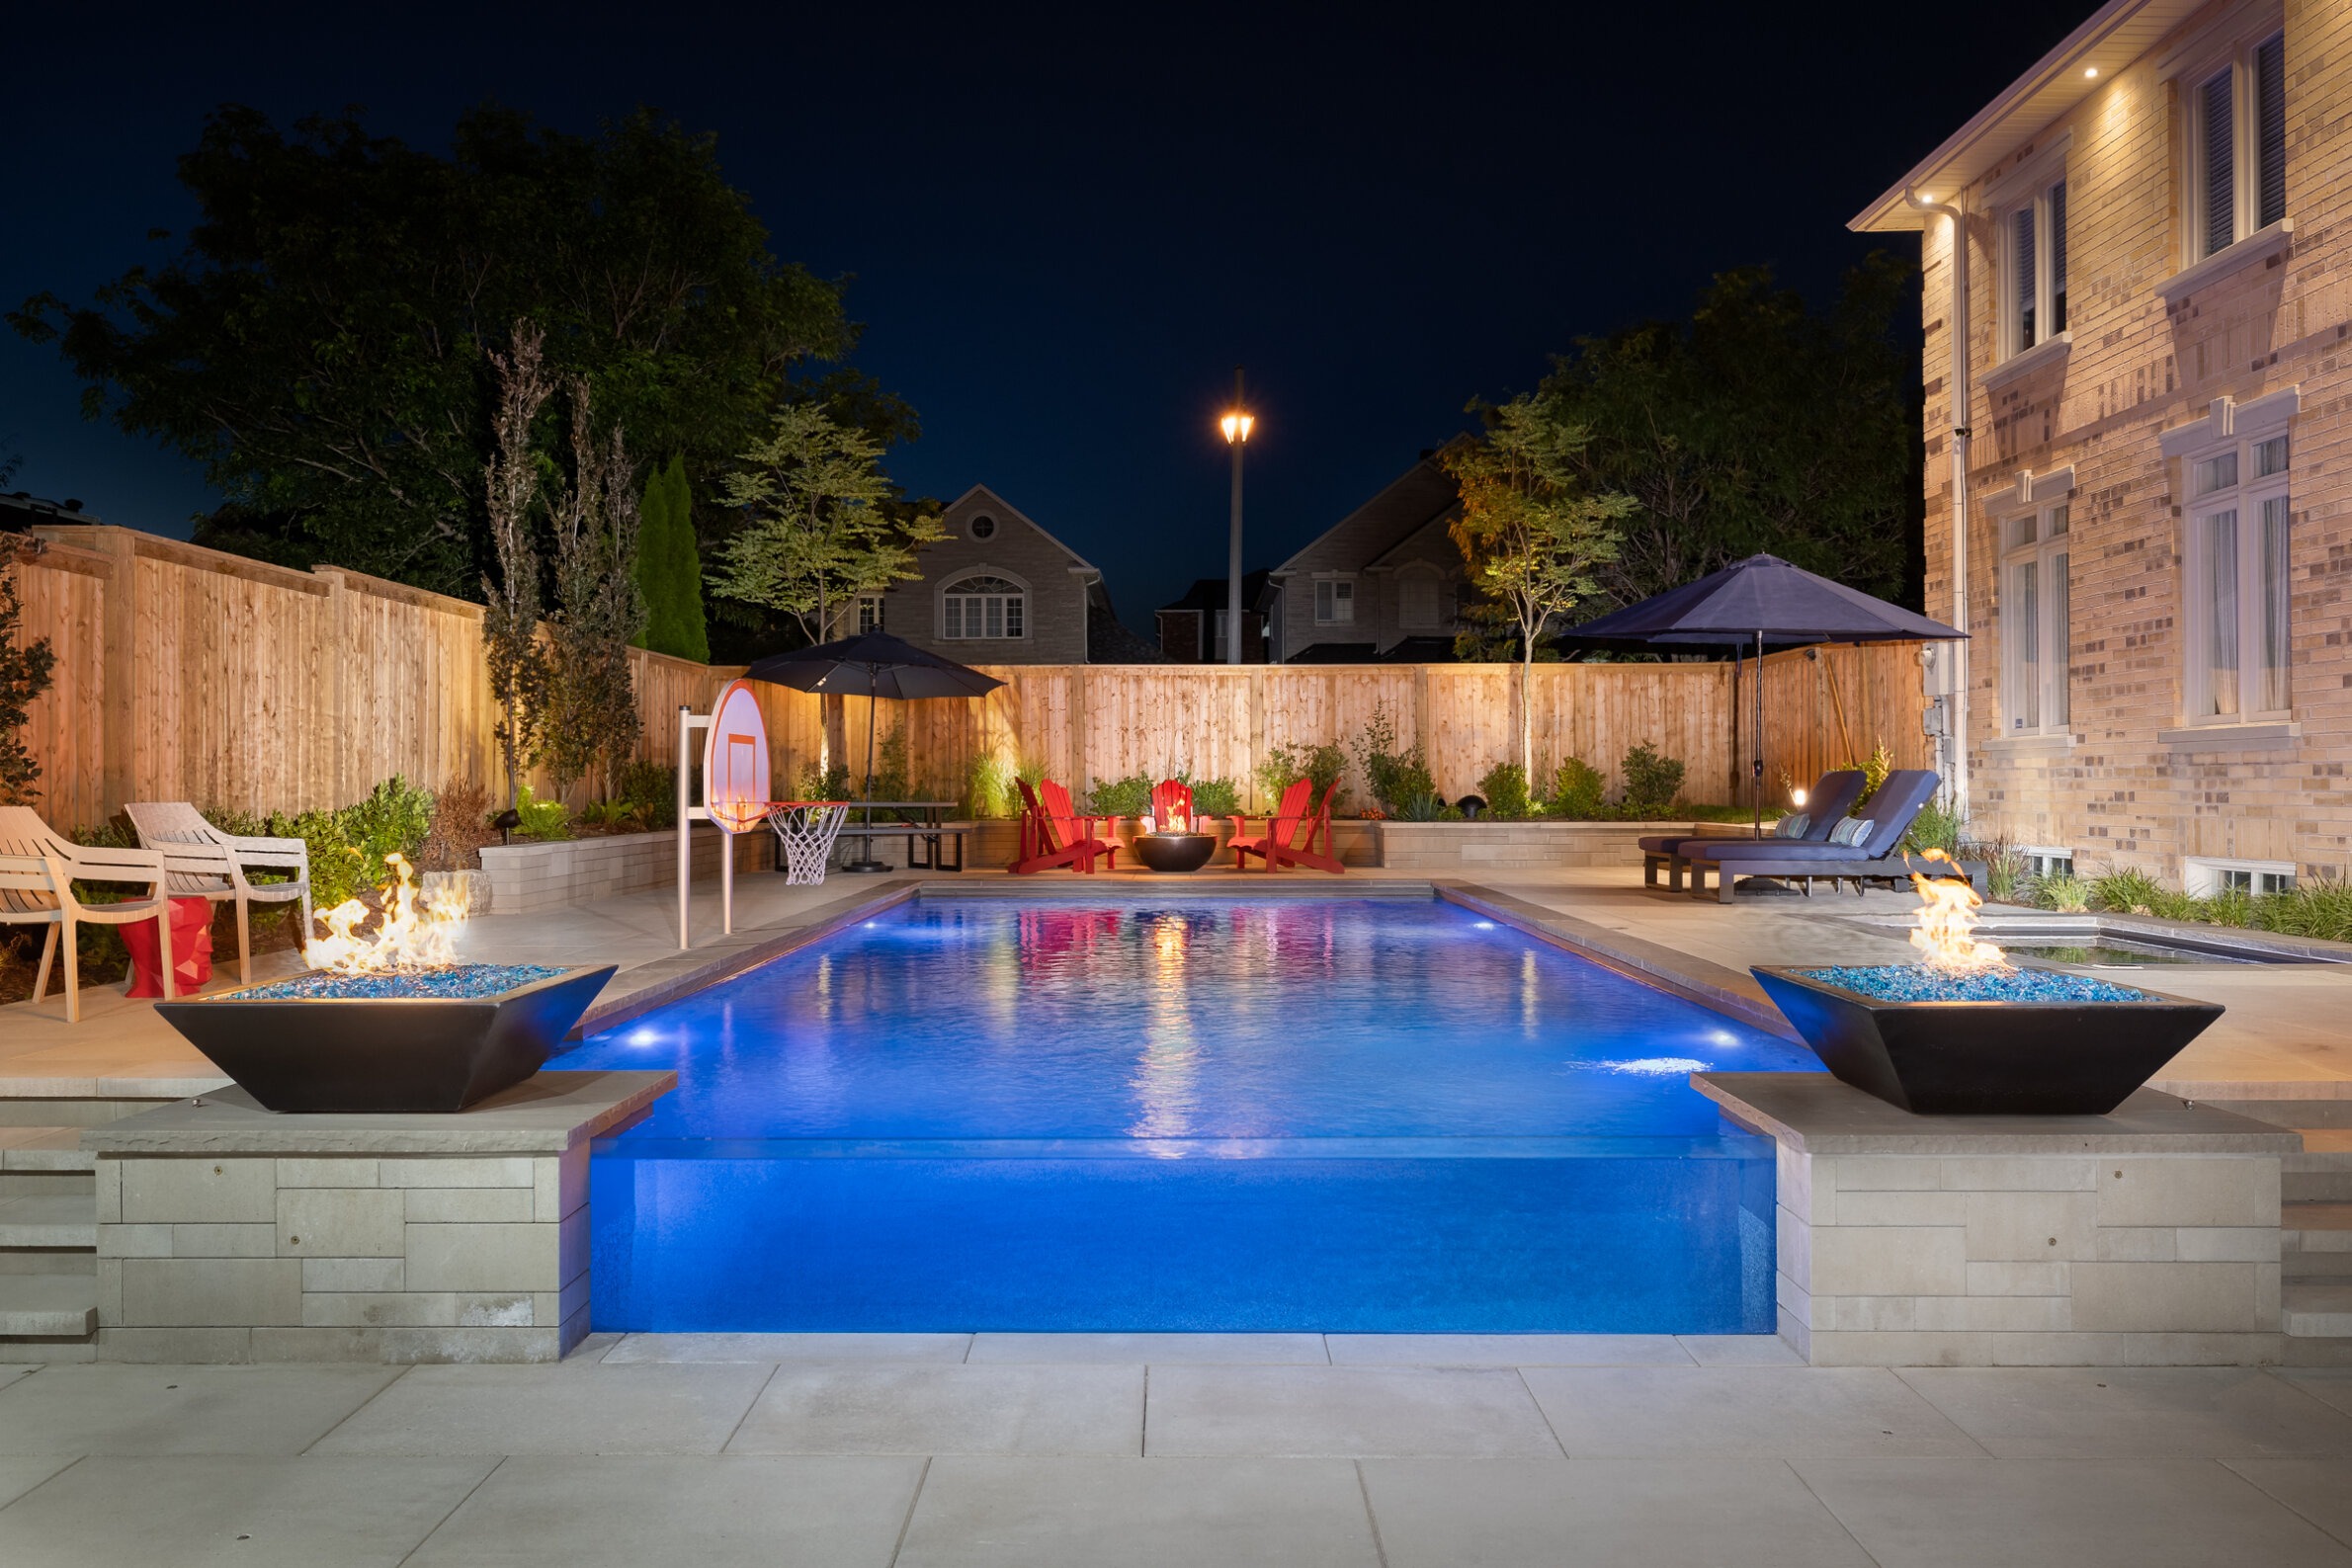 A luxurious backyard with a lit swimming pool at dusk, fire bowls, lounge chairs, basketball hoop, and ambient lighting, enclosed by a wooden fence.